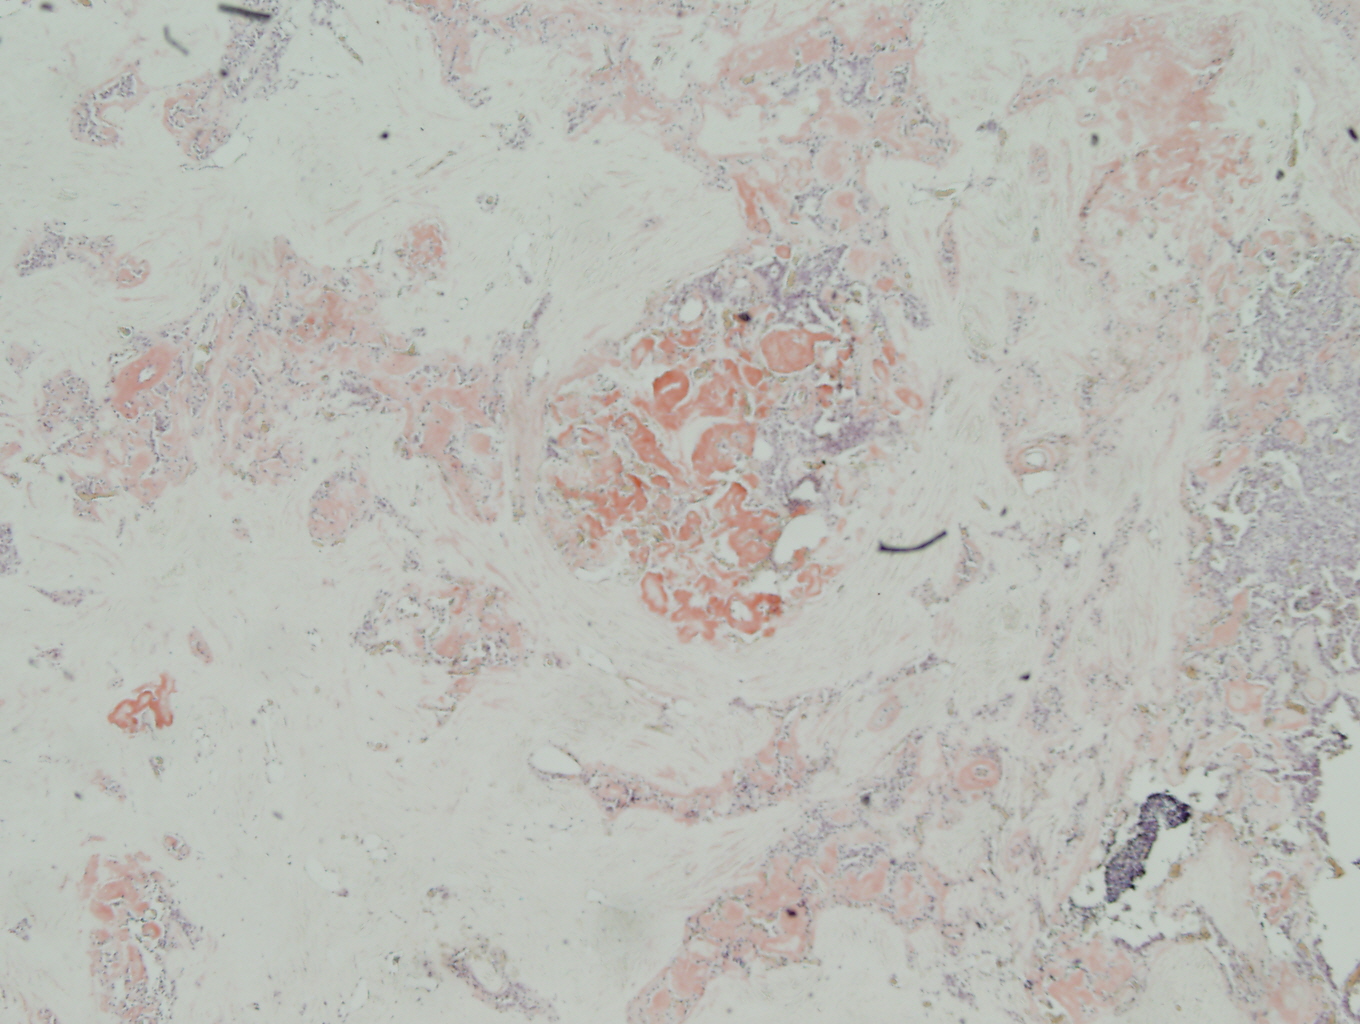 COTM August 2010 Immunohistochemical stains: Figure 1 of 2